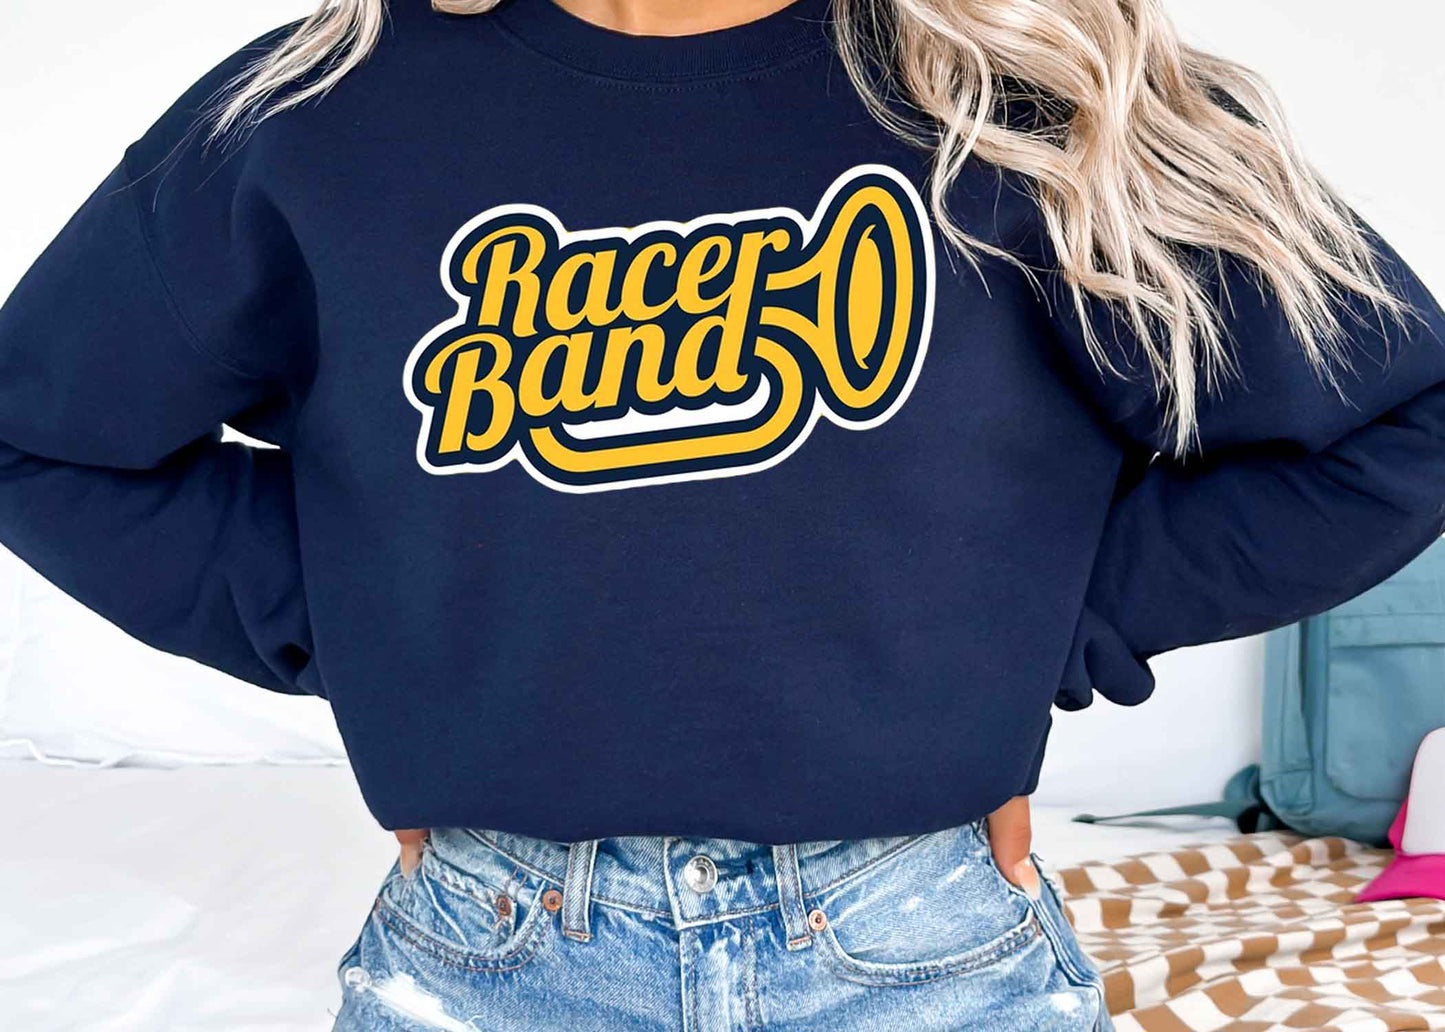 Murray state racer band